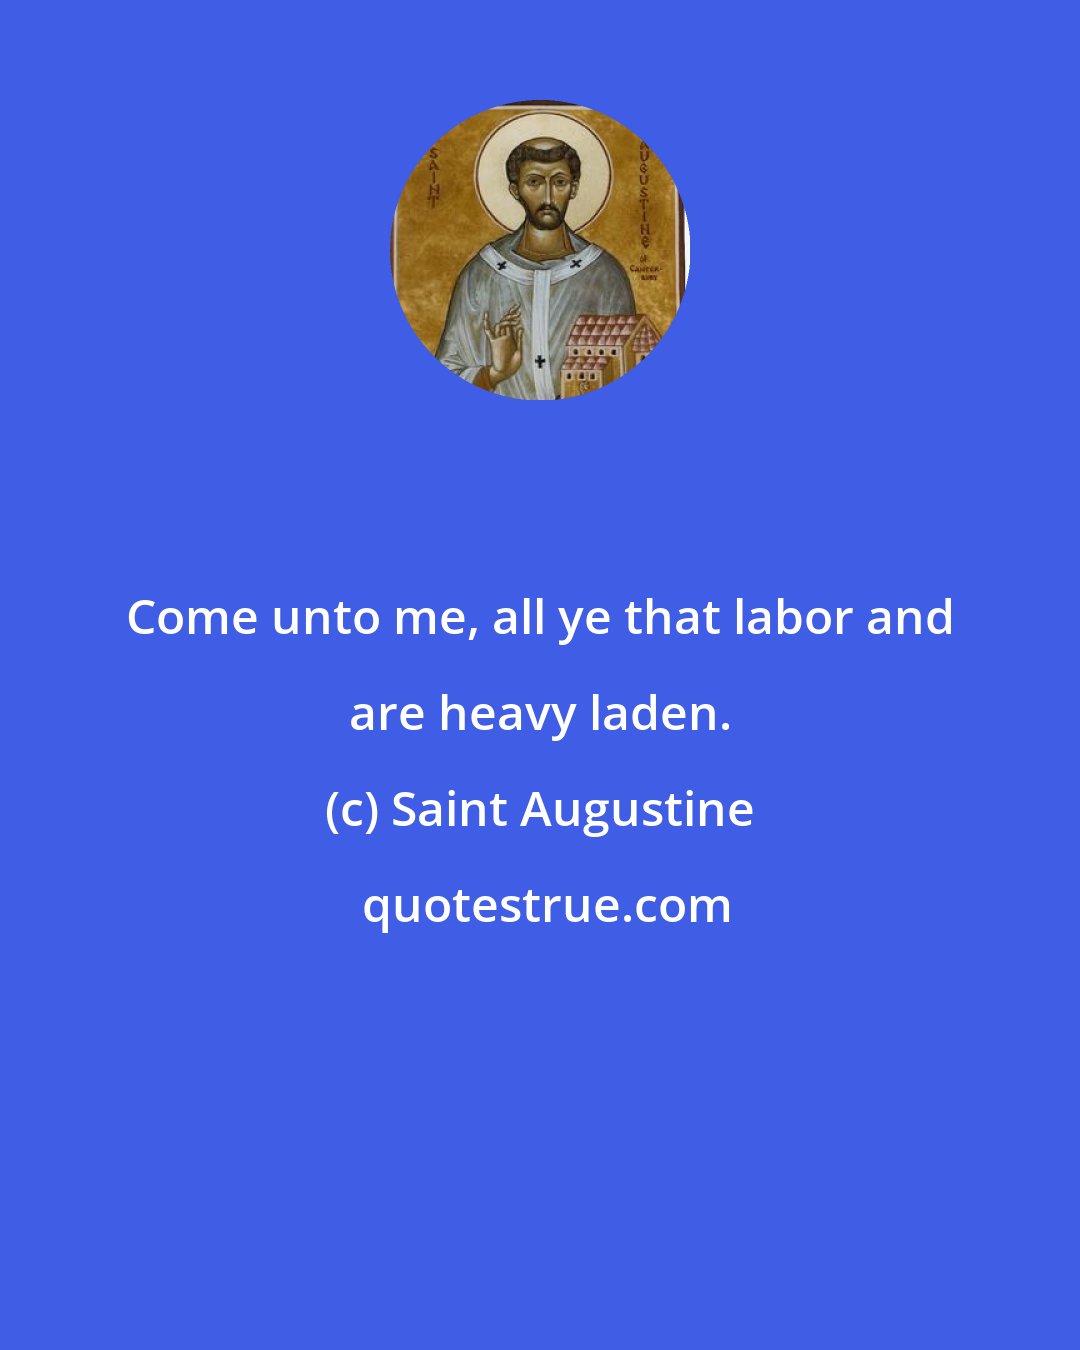 Saint Augustine: Come unto me, all ye that labor and are heavy laden.